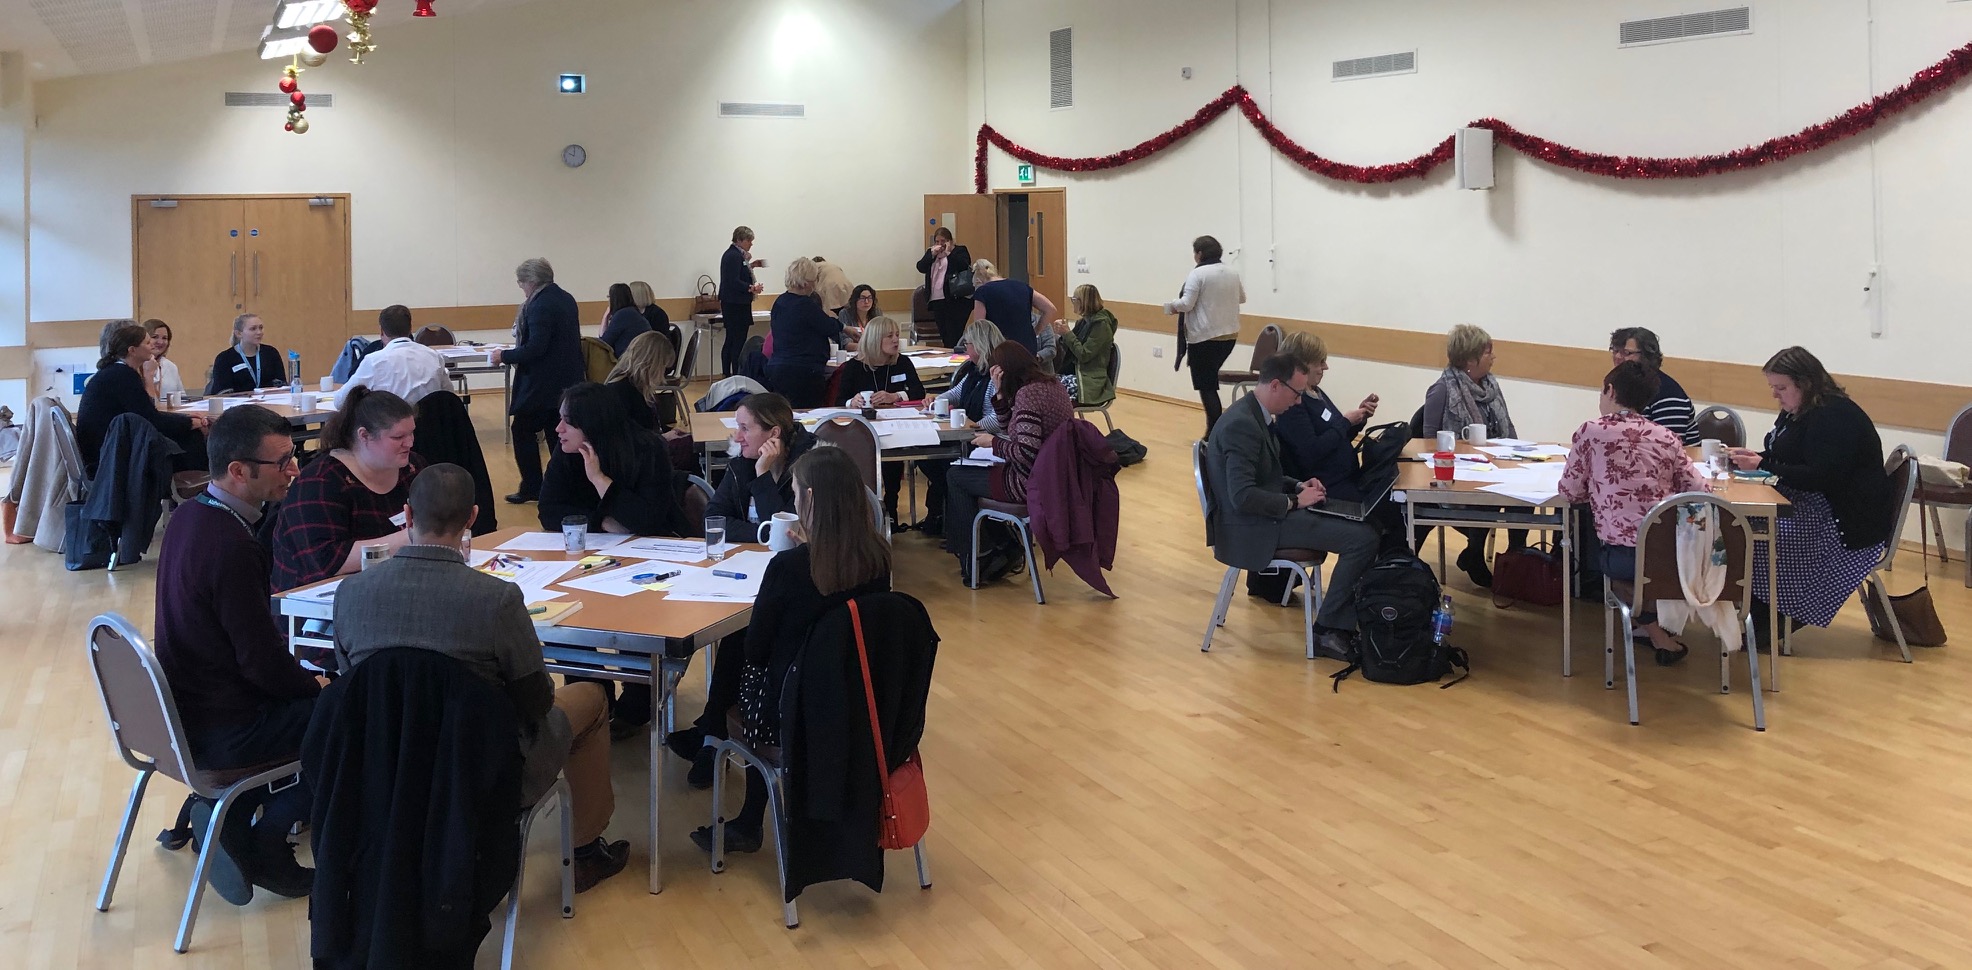 Photo, courtesty of NHS North Norfolk CCG, shows people sitting at tables at an engagement event.